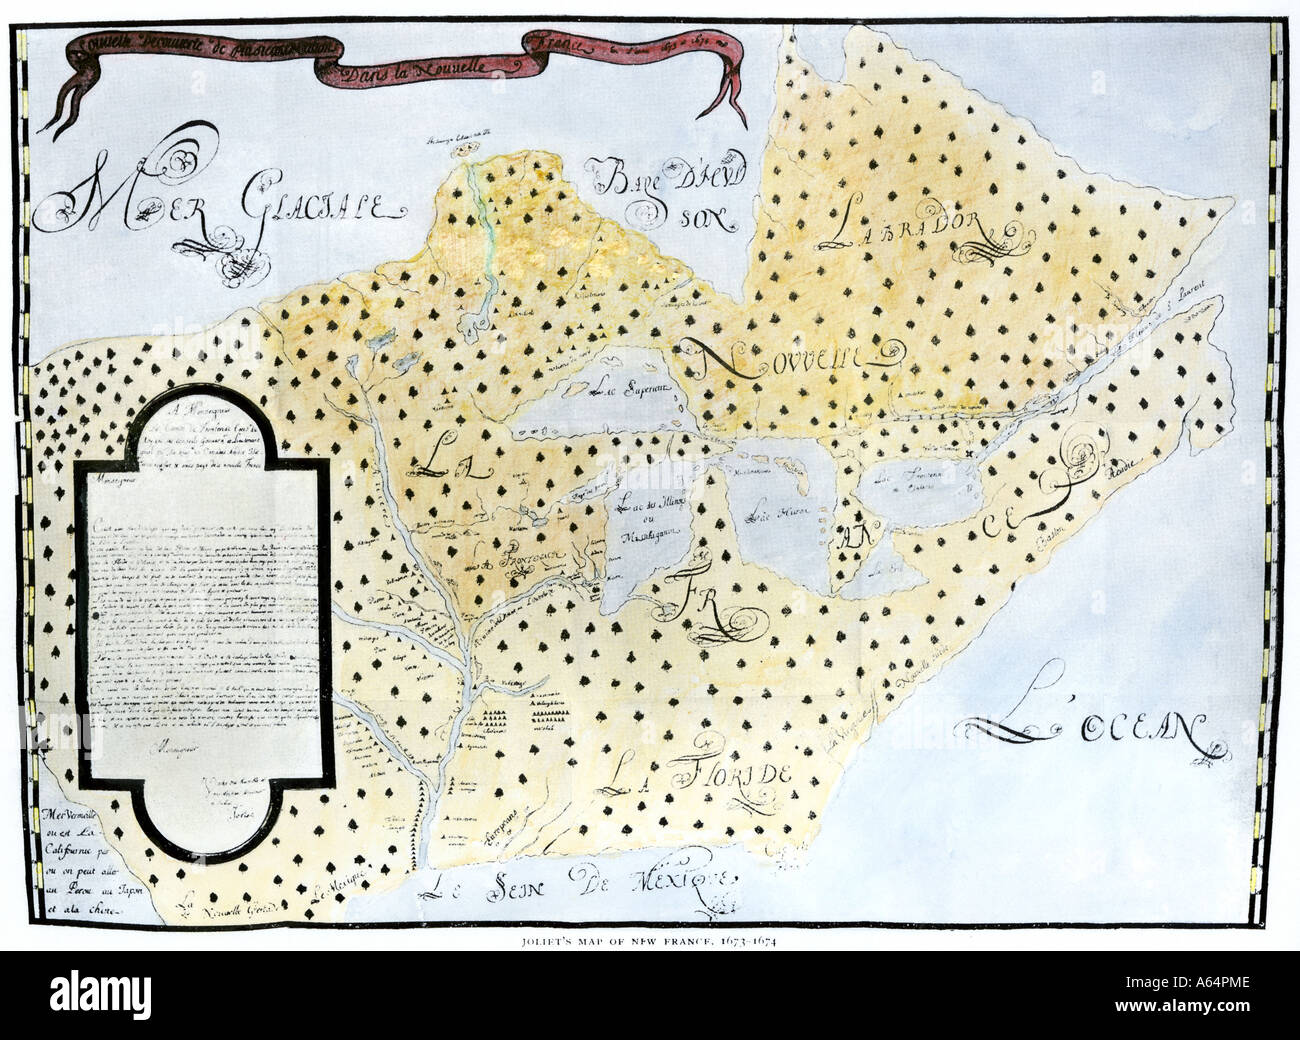 Louis Joliet map of New France 1673 1674 including the upper Mississippi River discovered with Jacques Marquette. Hand-colored halftone Stock Photo